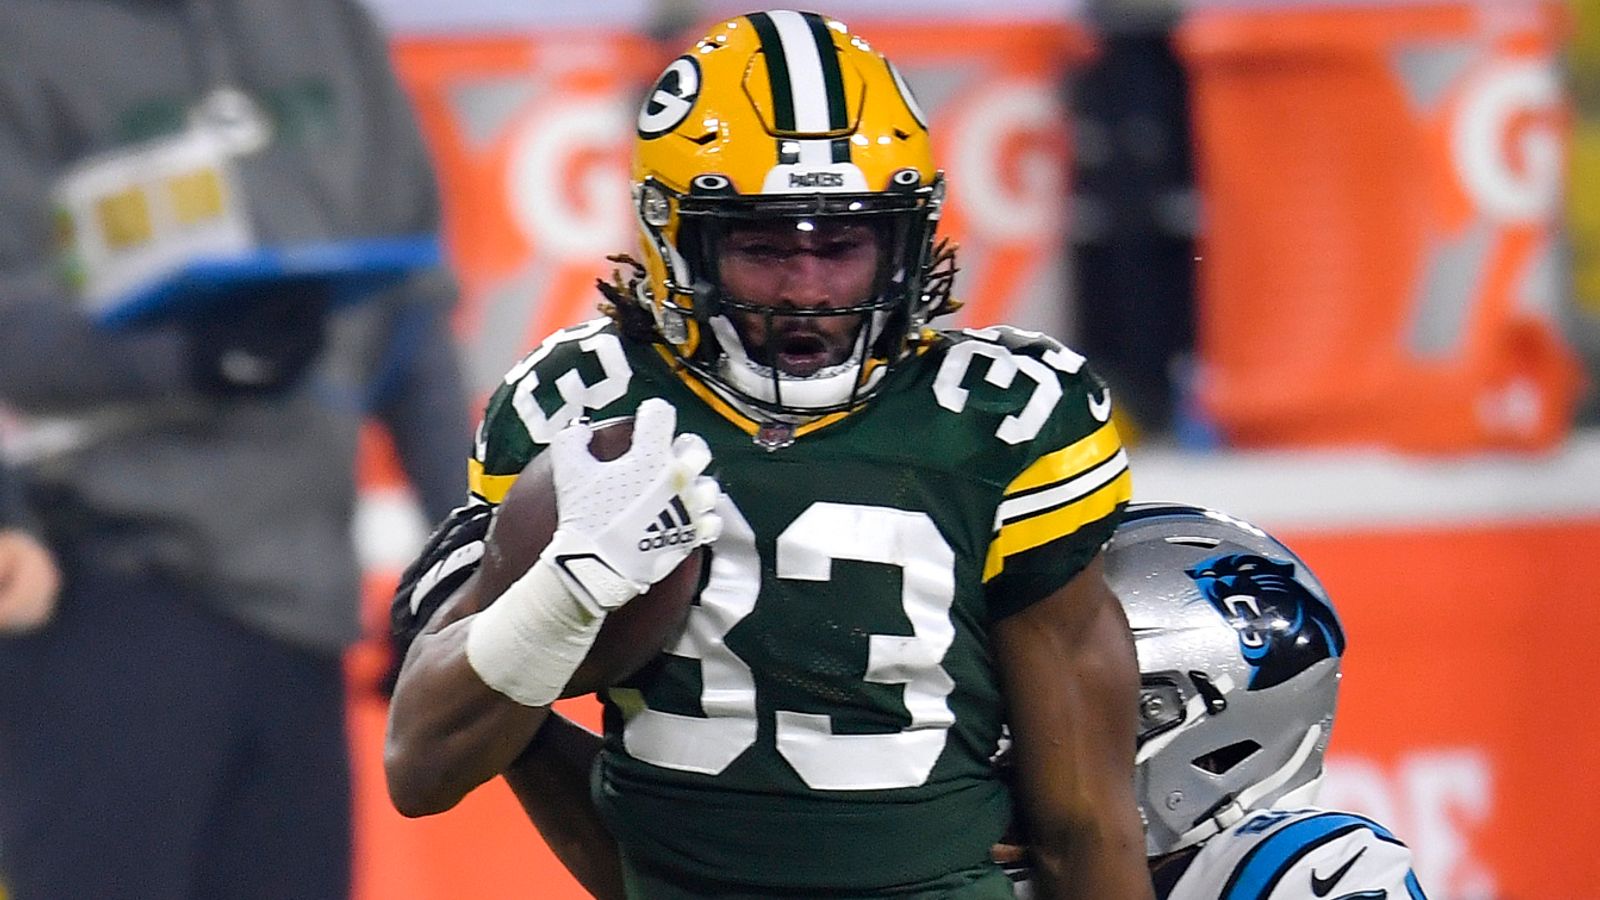 Carolina Panthers 16 24 Green Bay Packers Aaron Jones Leads Packers To Fourth Straight Win Nfl News Sky Sports